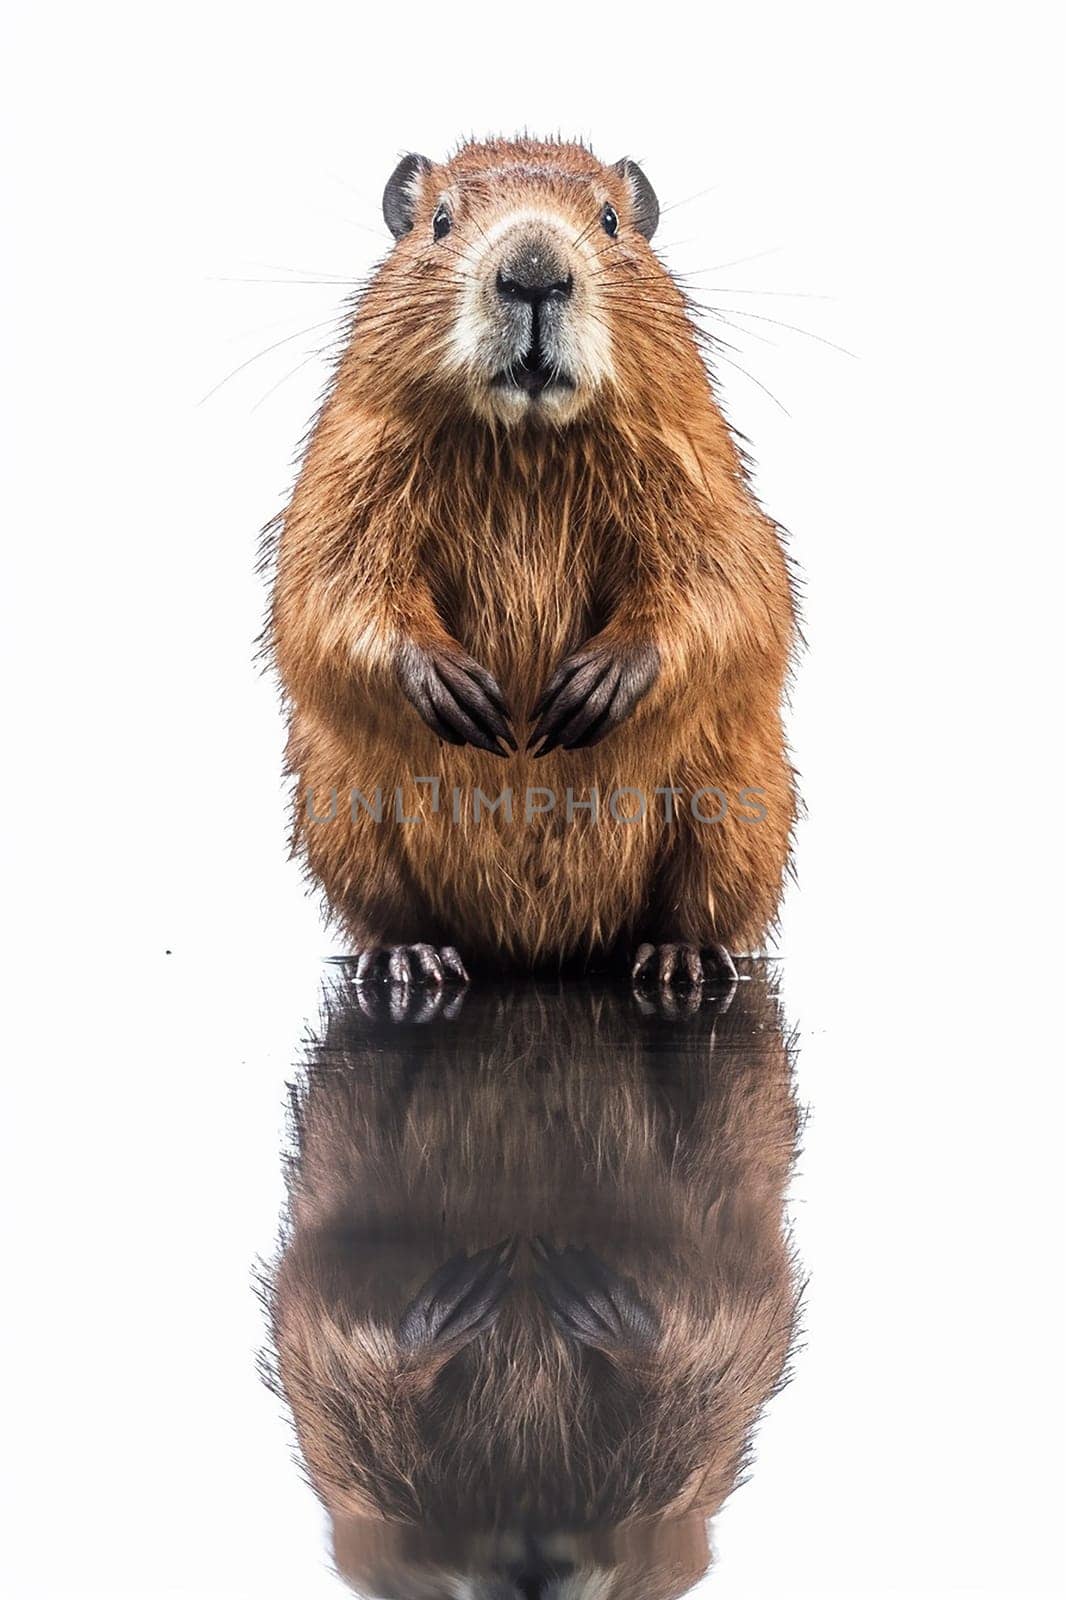 Beaver standing with reflection on white background